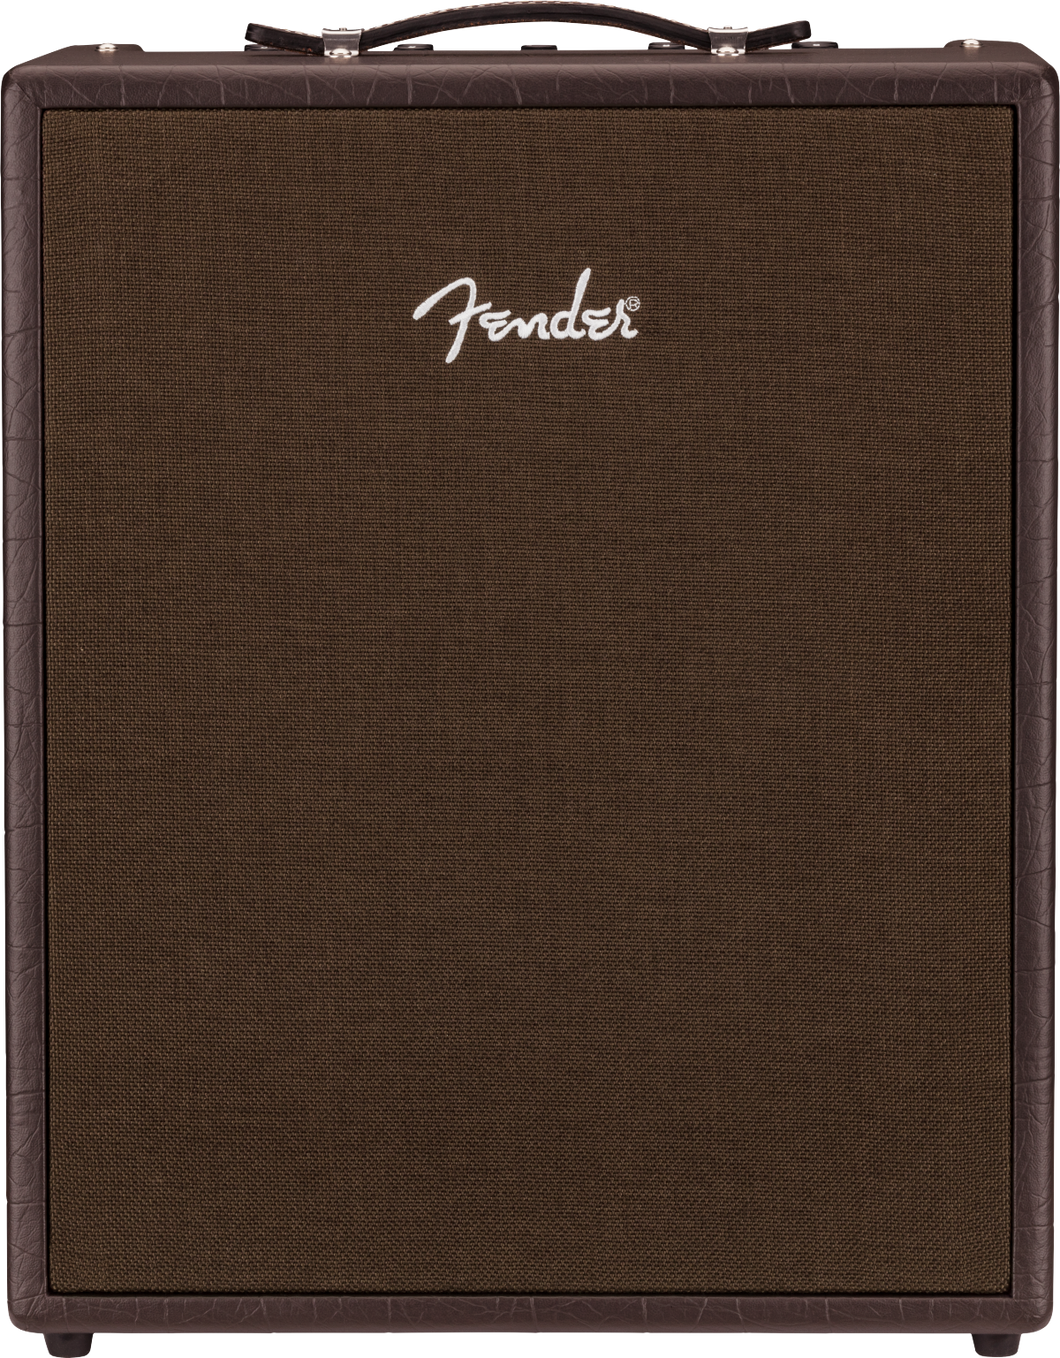 Fender Acoustic SFX II amplifier with looper & Bluetooth